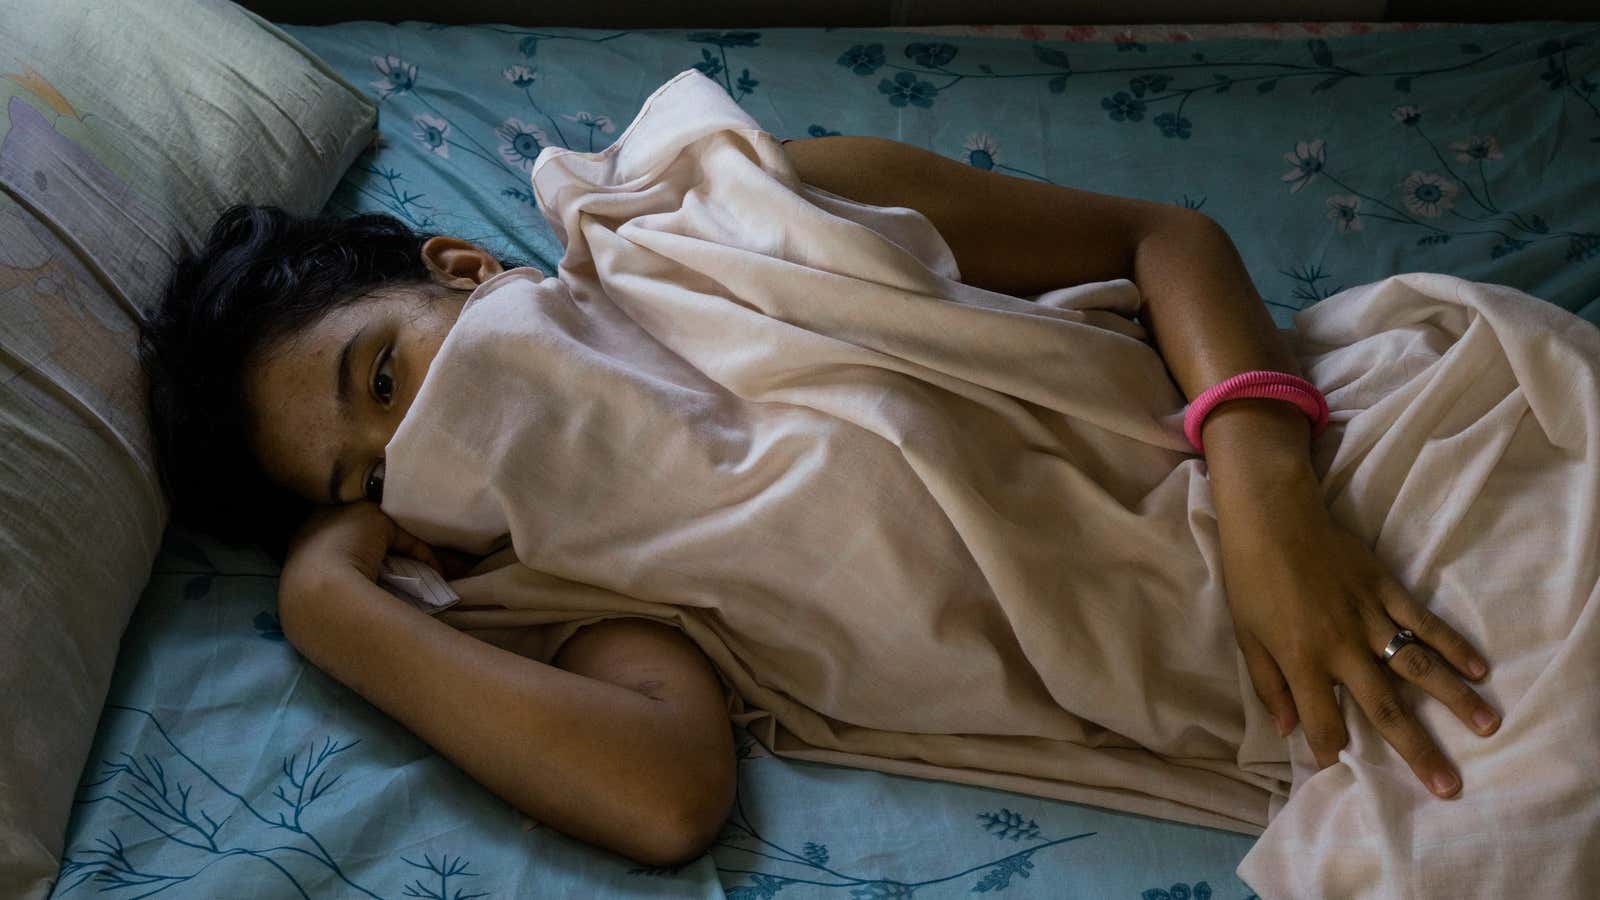 Climate change has created a new generation of sex-trafficking victims in the Philippines